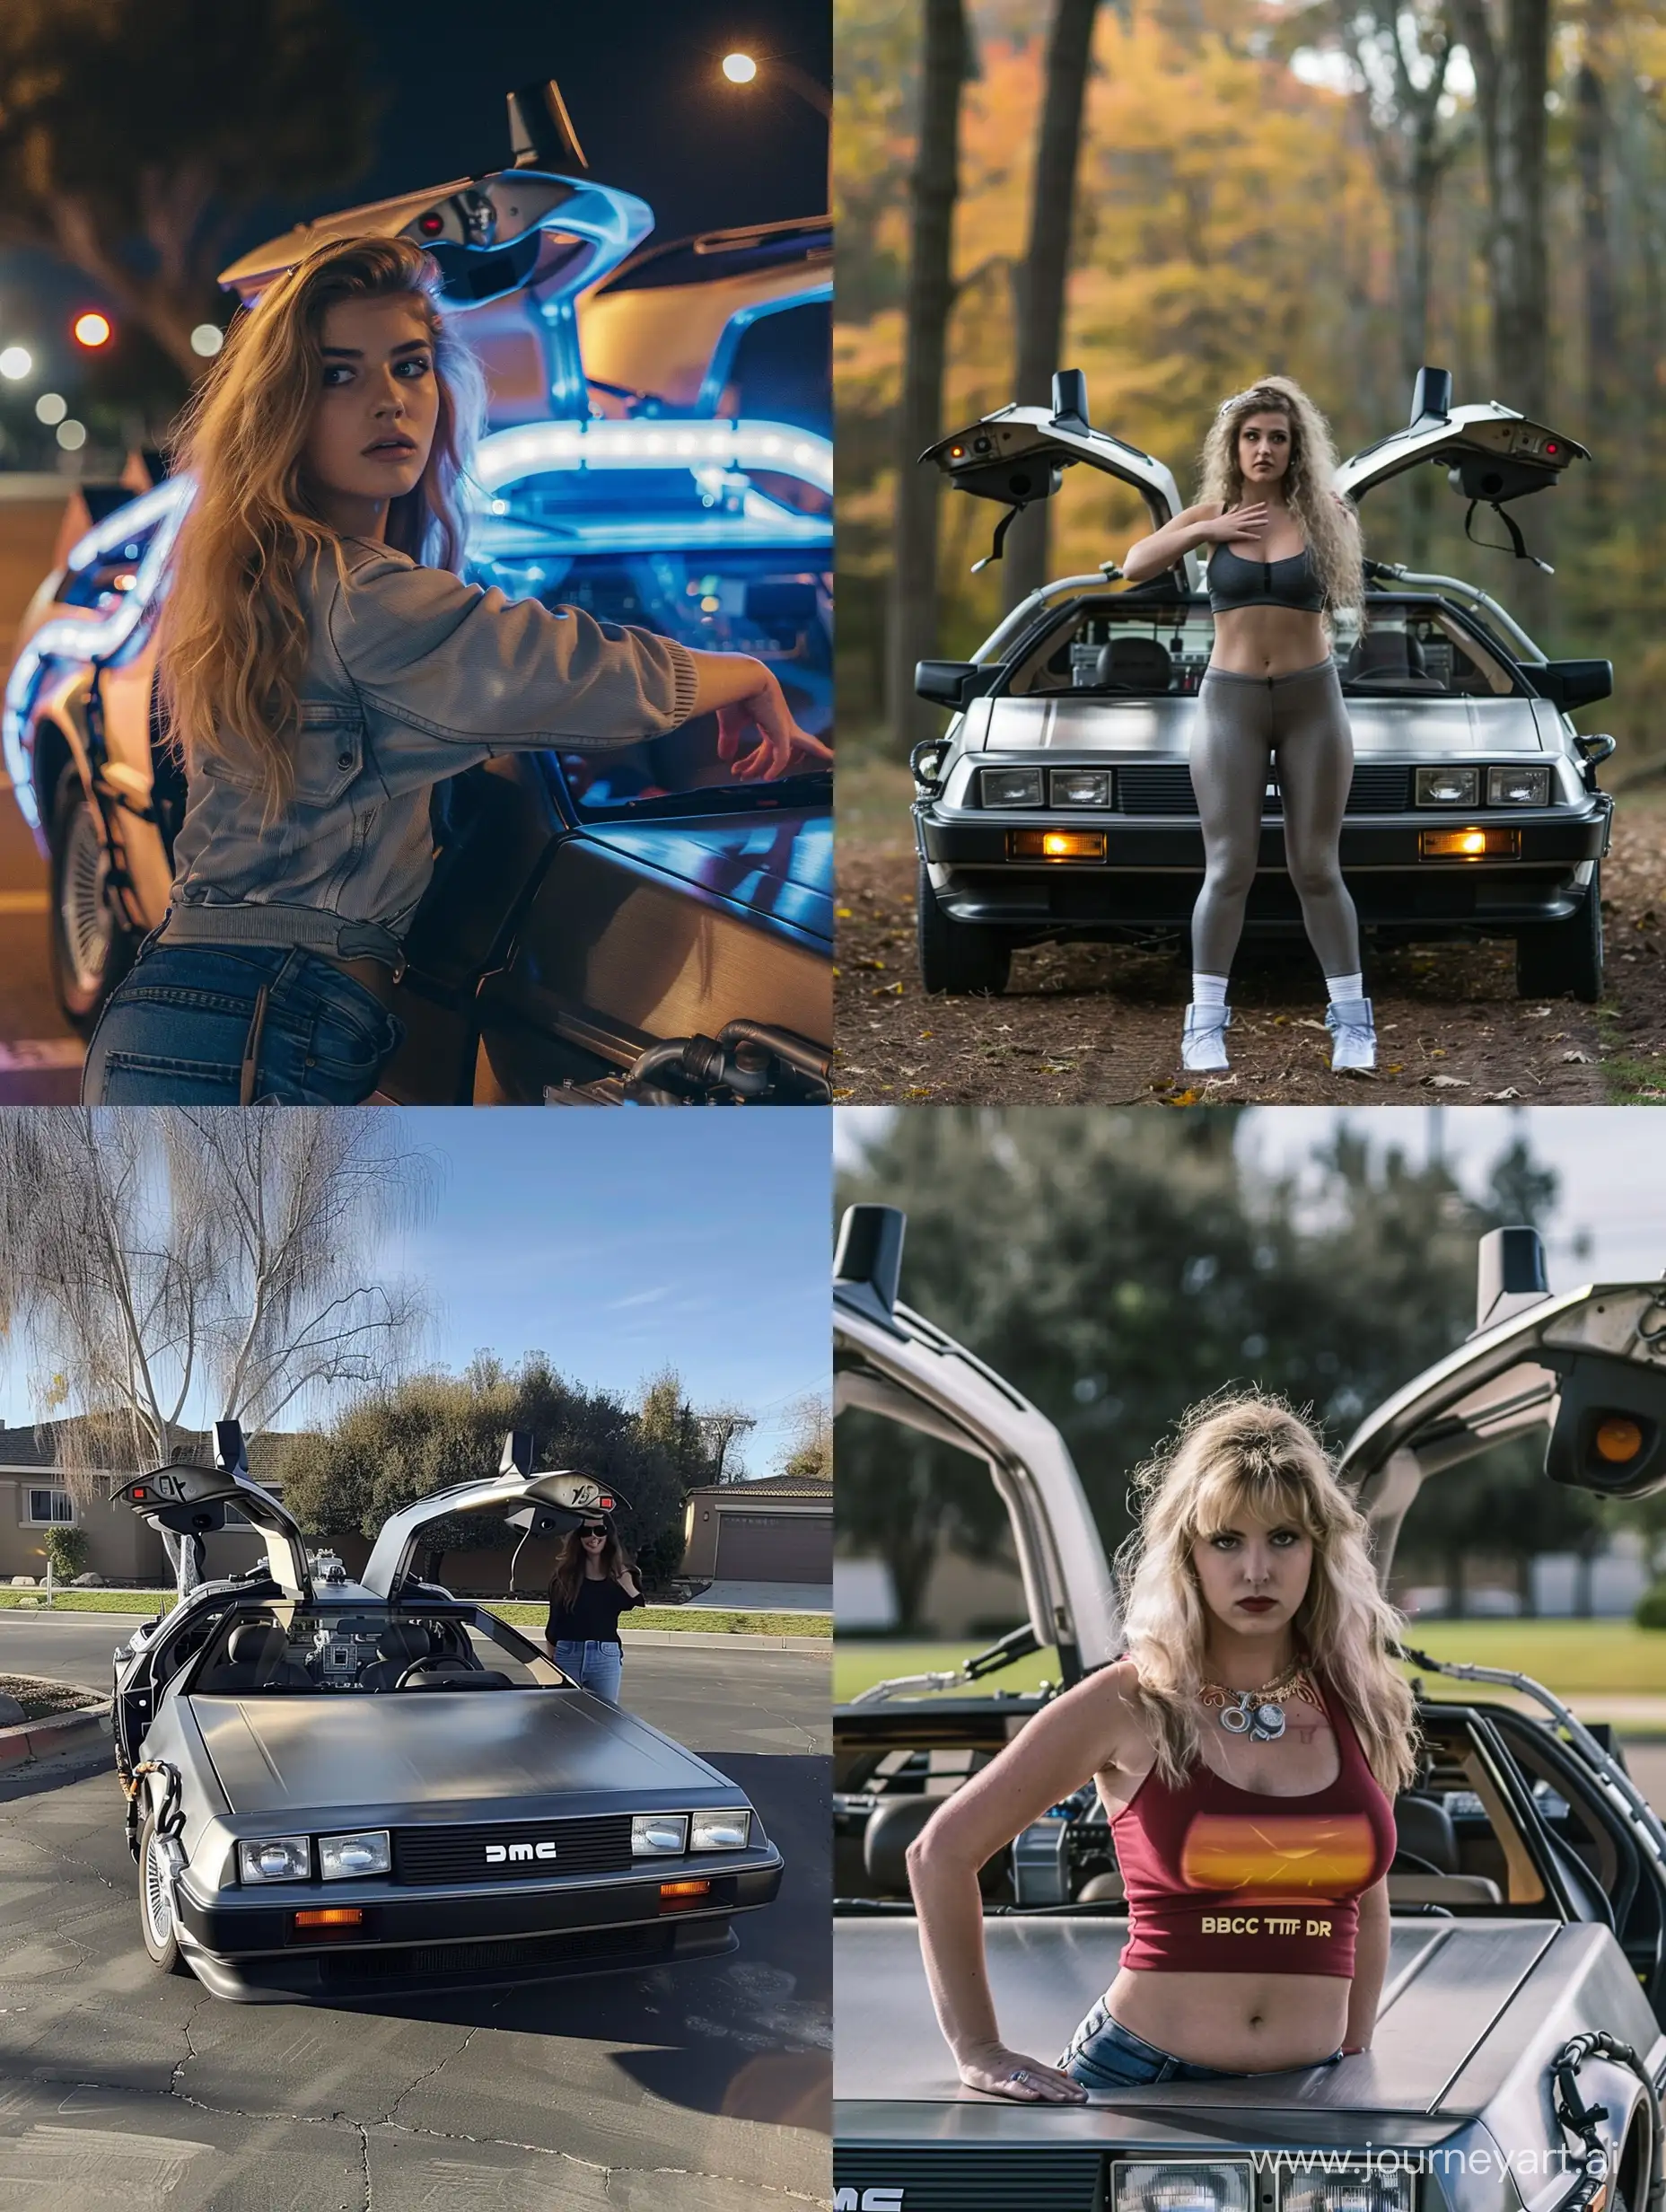 Stylish-Woman-Poses-with-Back-to-the-Future-DeLorean